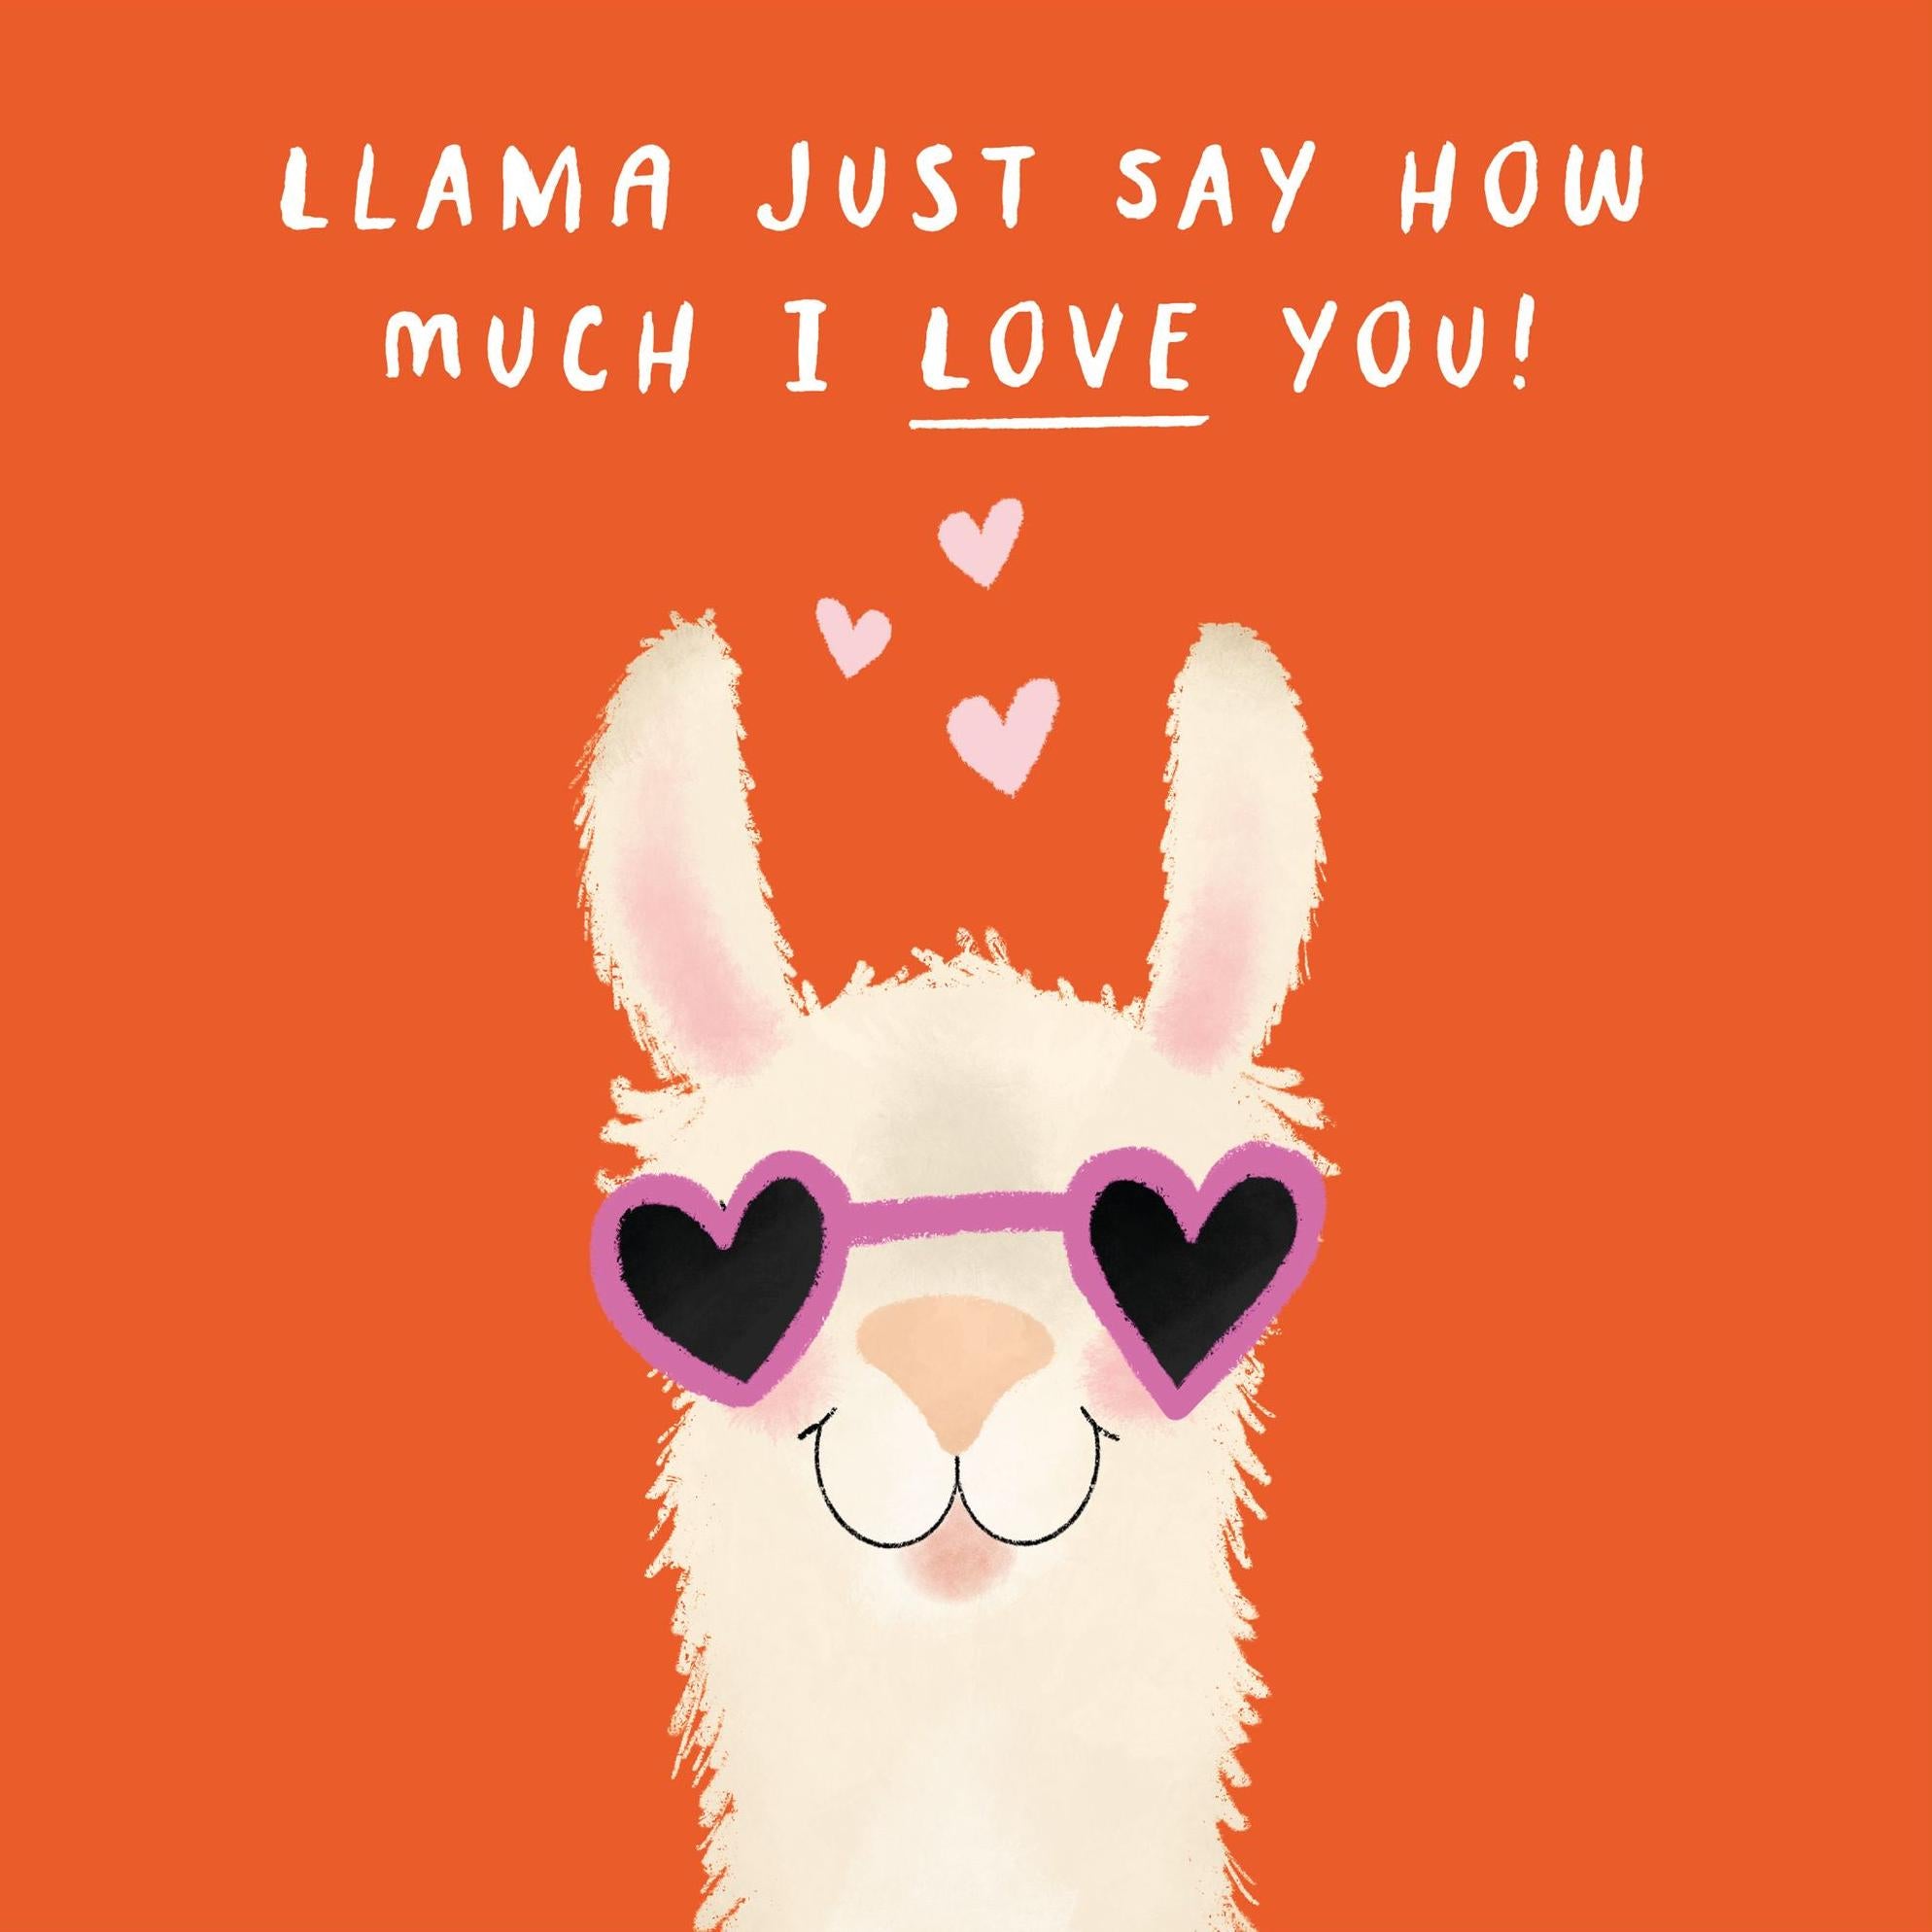 Say　I　Confetti-exploding　–　Just　You　Greetings　Card　Love　Llama　Much　How　Boomf